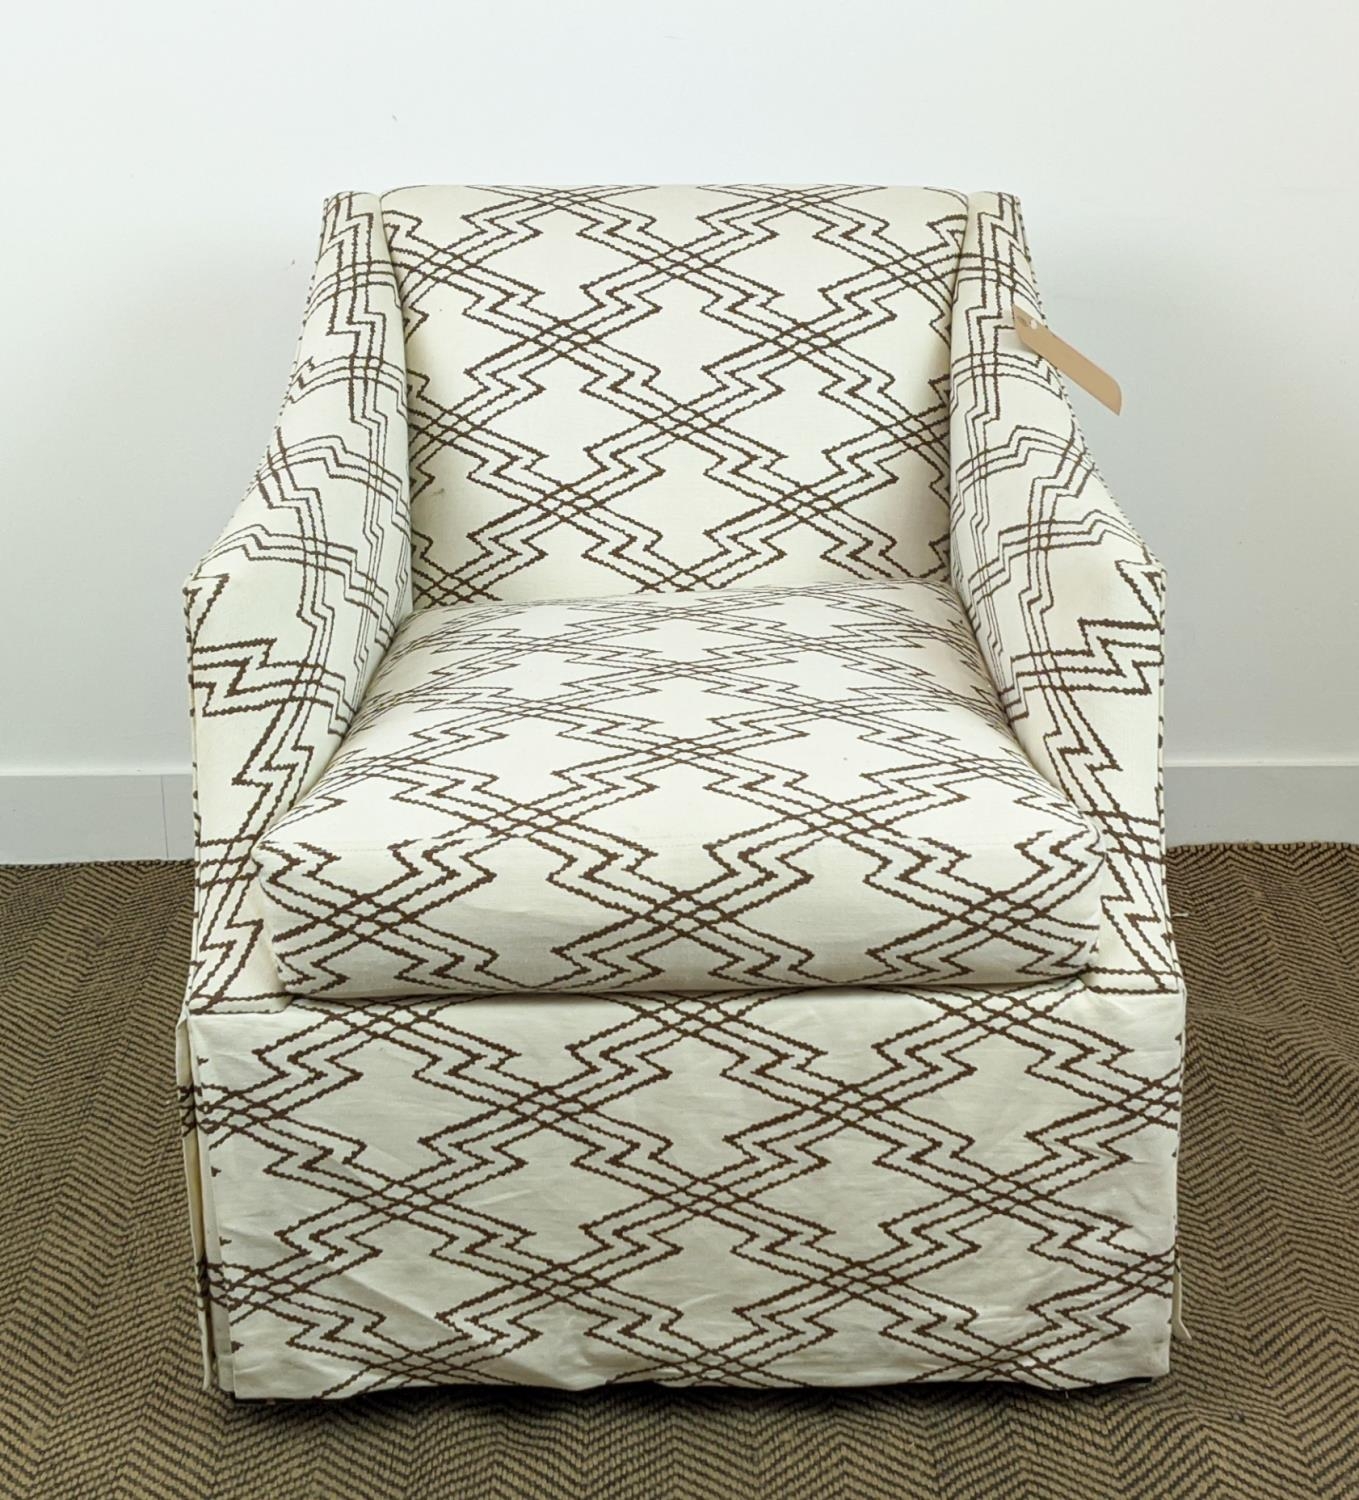 PAOLO MOSCHINO CHARLES ARMCHAIR, in via Krupp bis brown upholstery, 74cm W. - Image 7 of 8